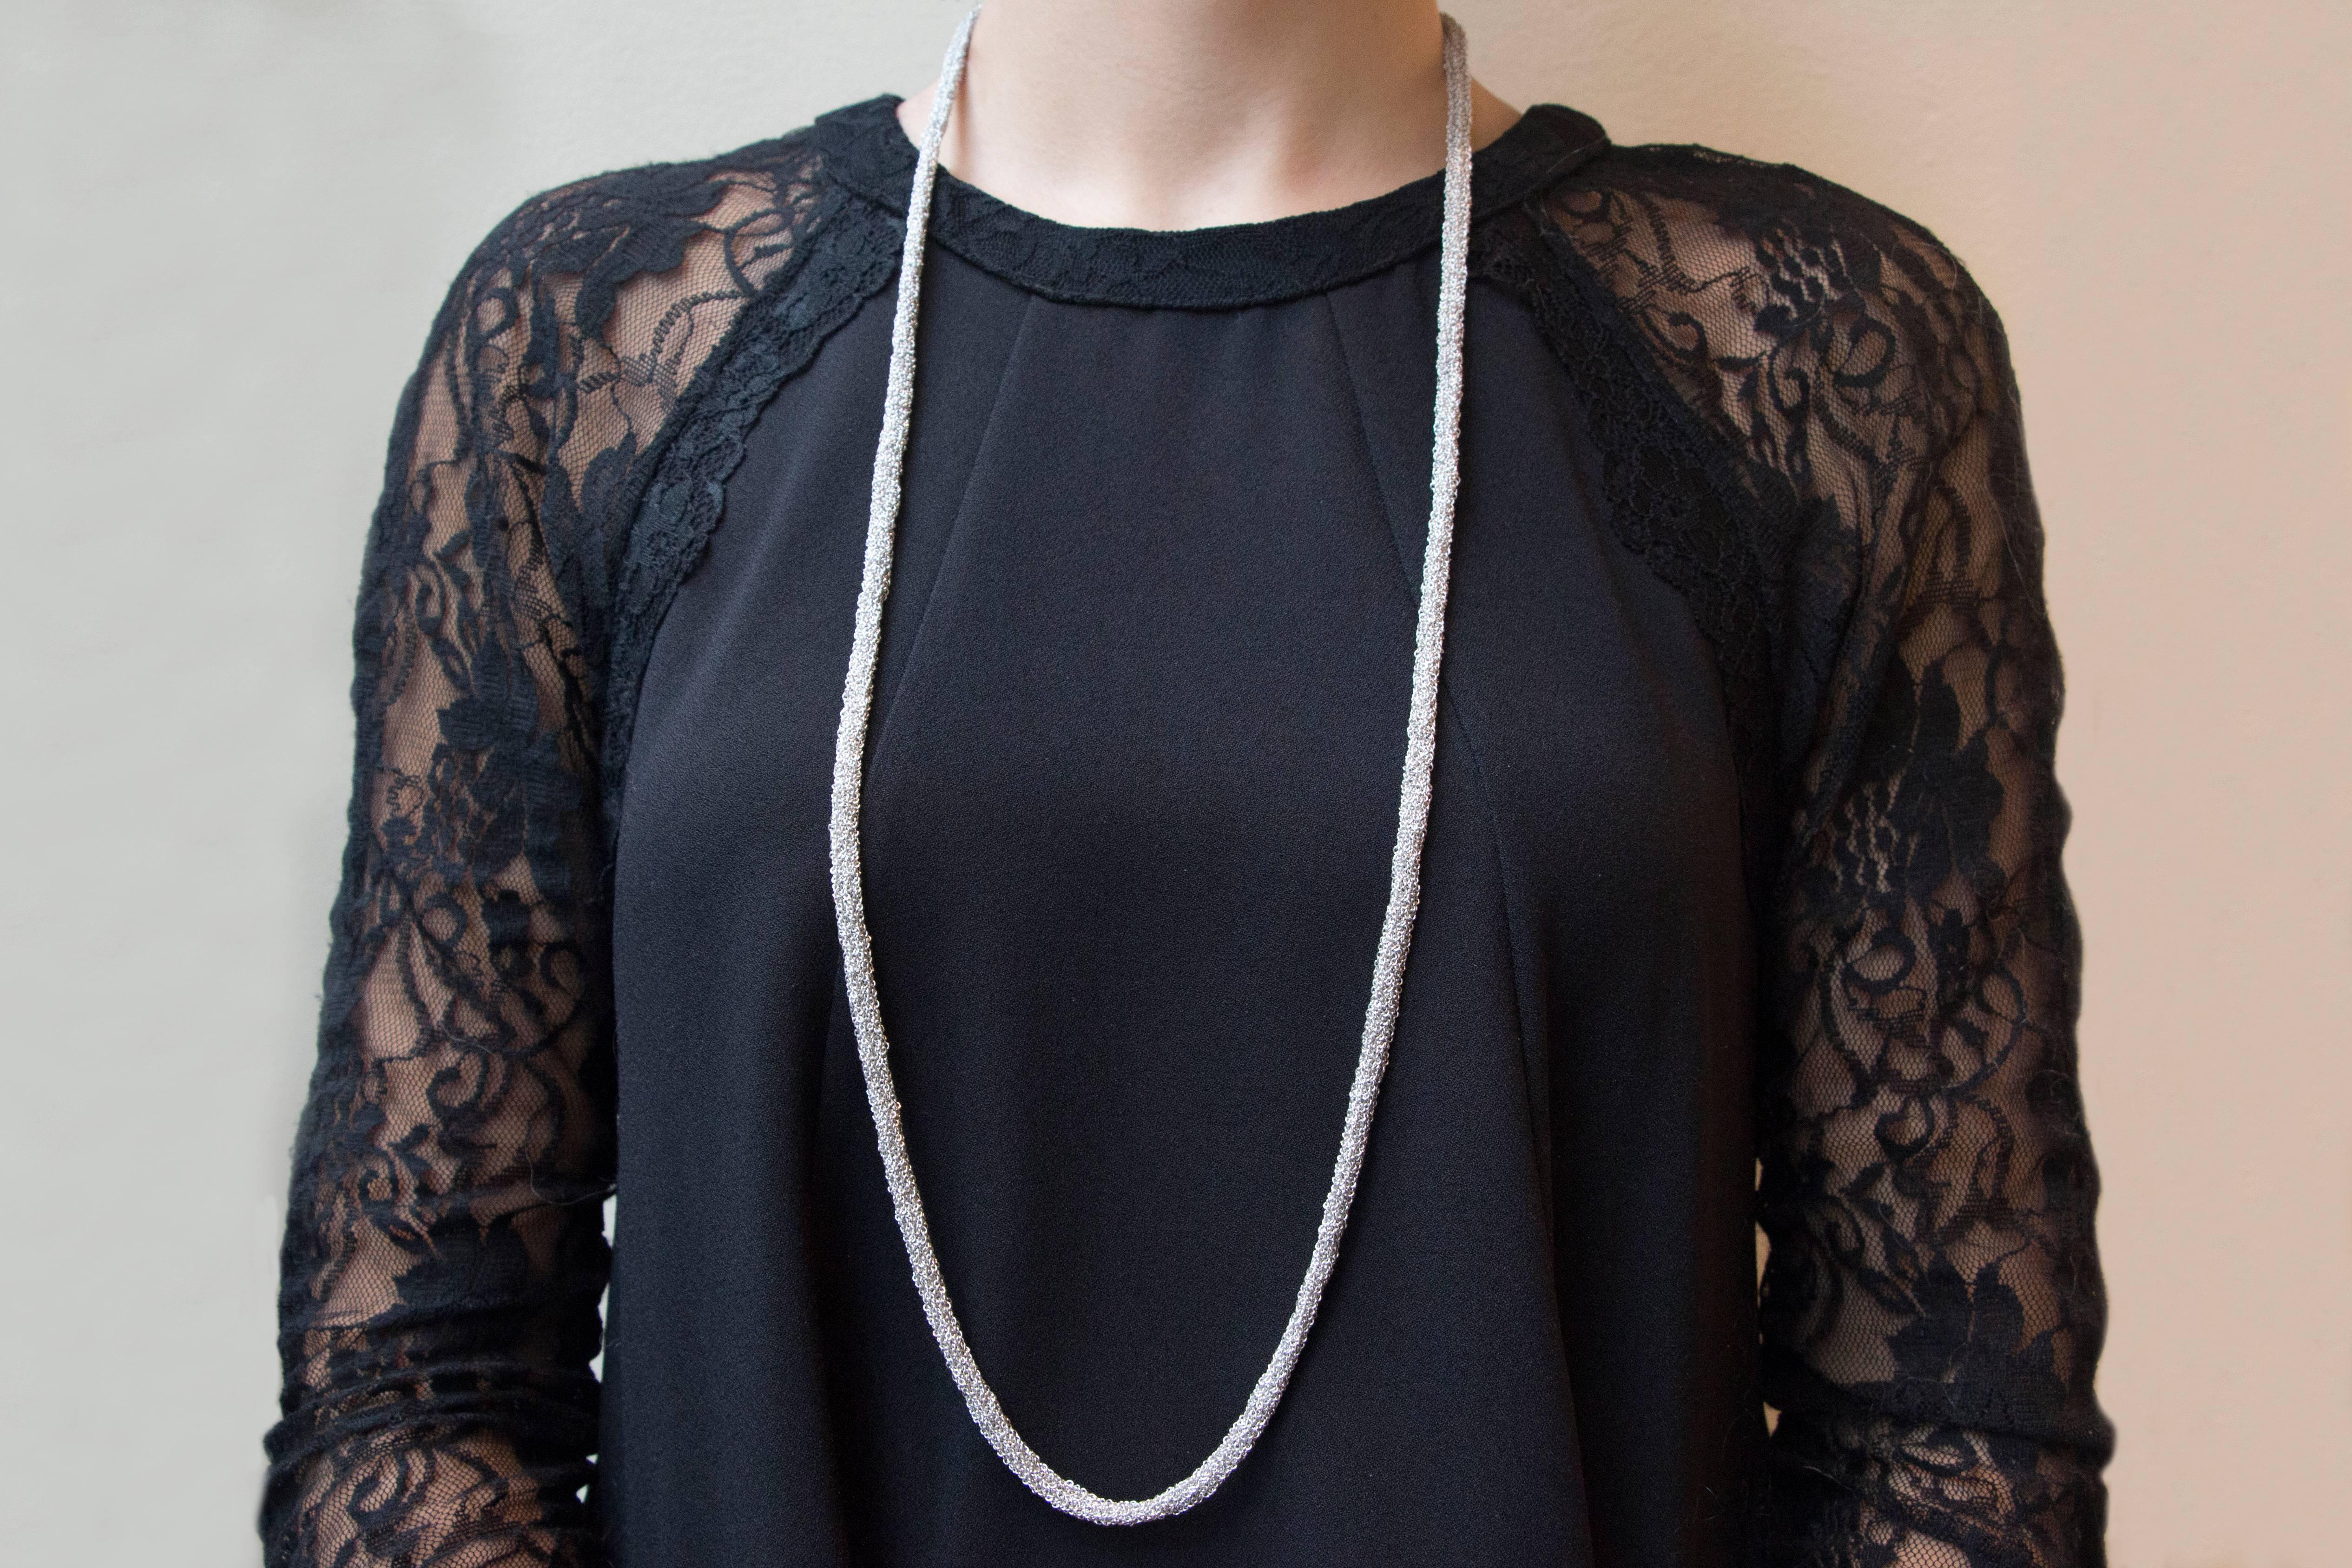 Jona design collection, hand crafted in Italy, rhodium plate sterling silver long chain necklace, 35.43 inch- 90cm long, made of woven small chains.

All Jona jewelry is new and has never been previously owned or worn. Each item will arrive at your